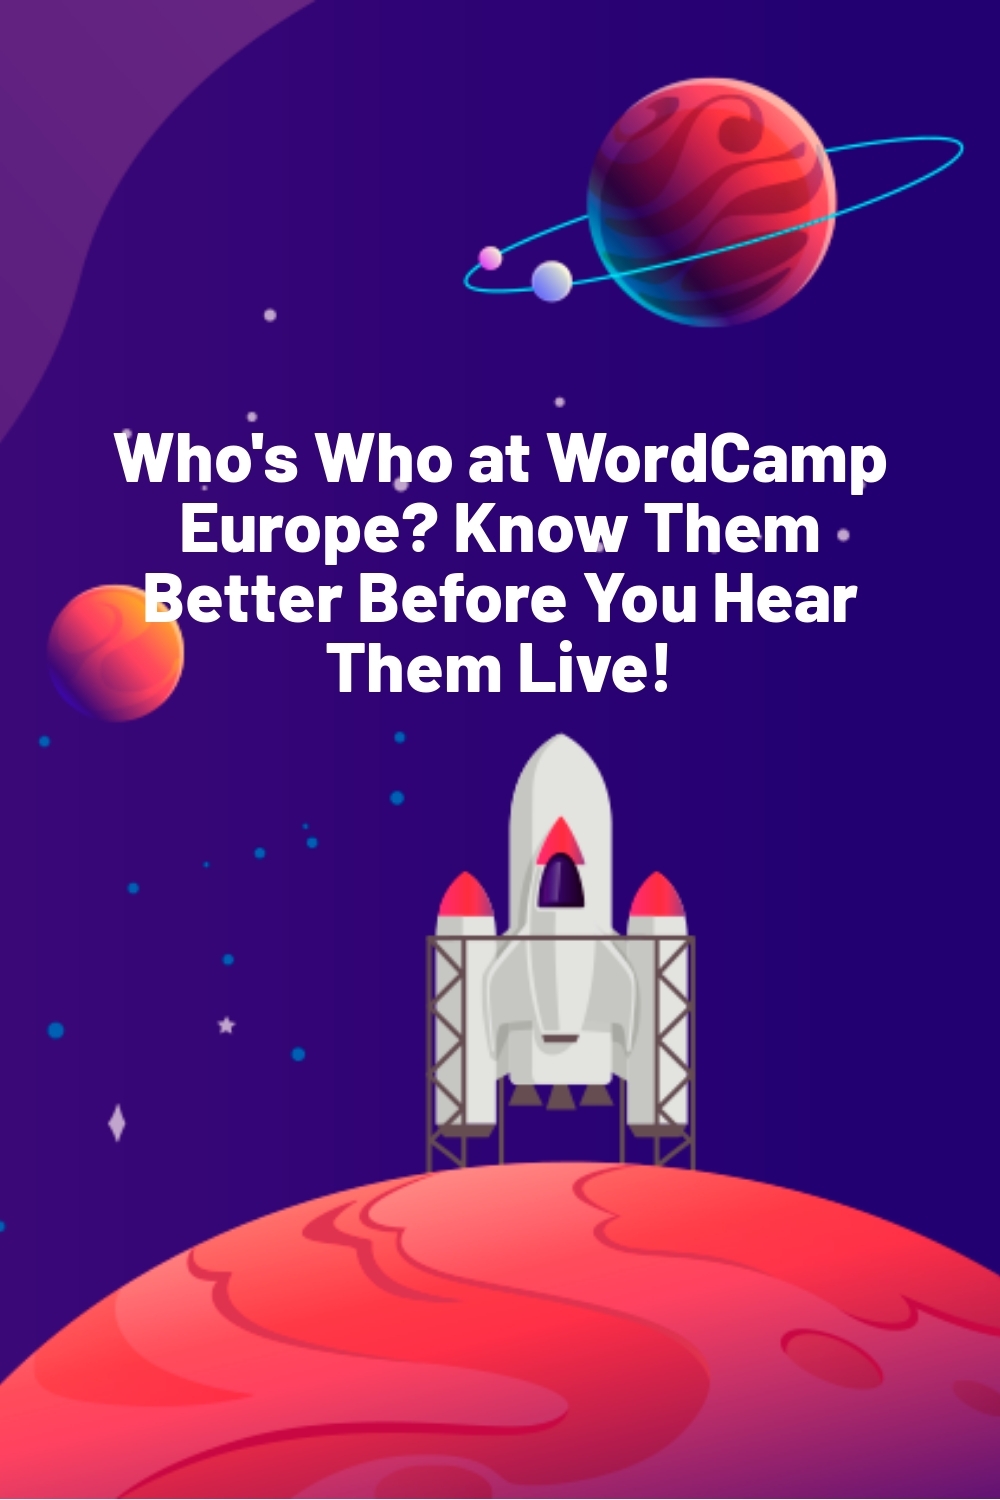 Who’s Who at WordCamp Europe? Know Them Better Before You Hear Them Live!